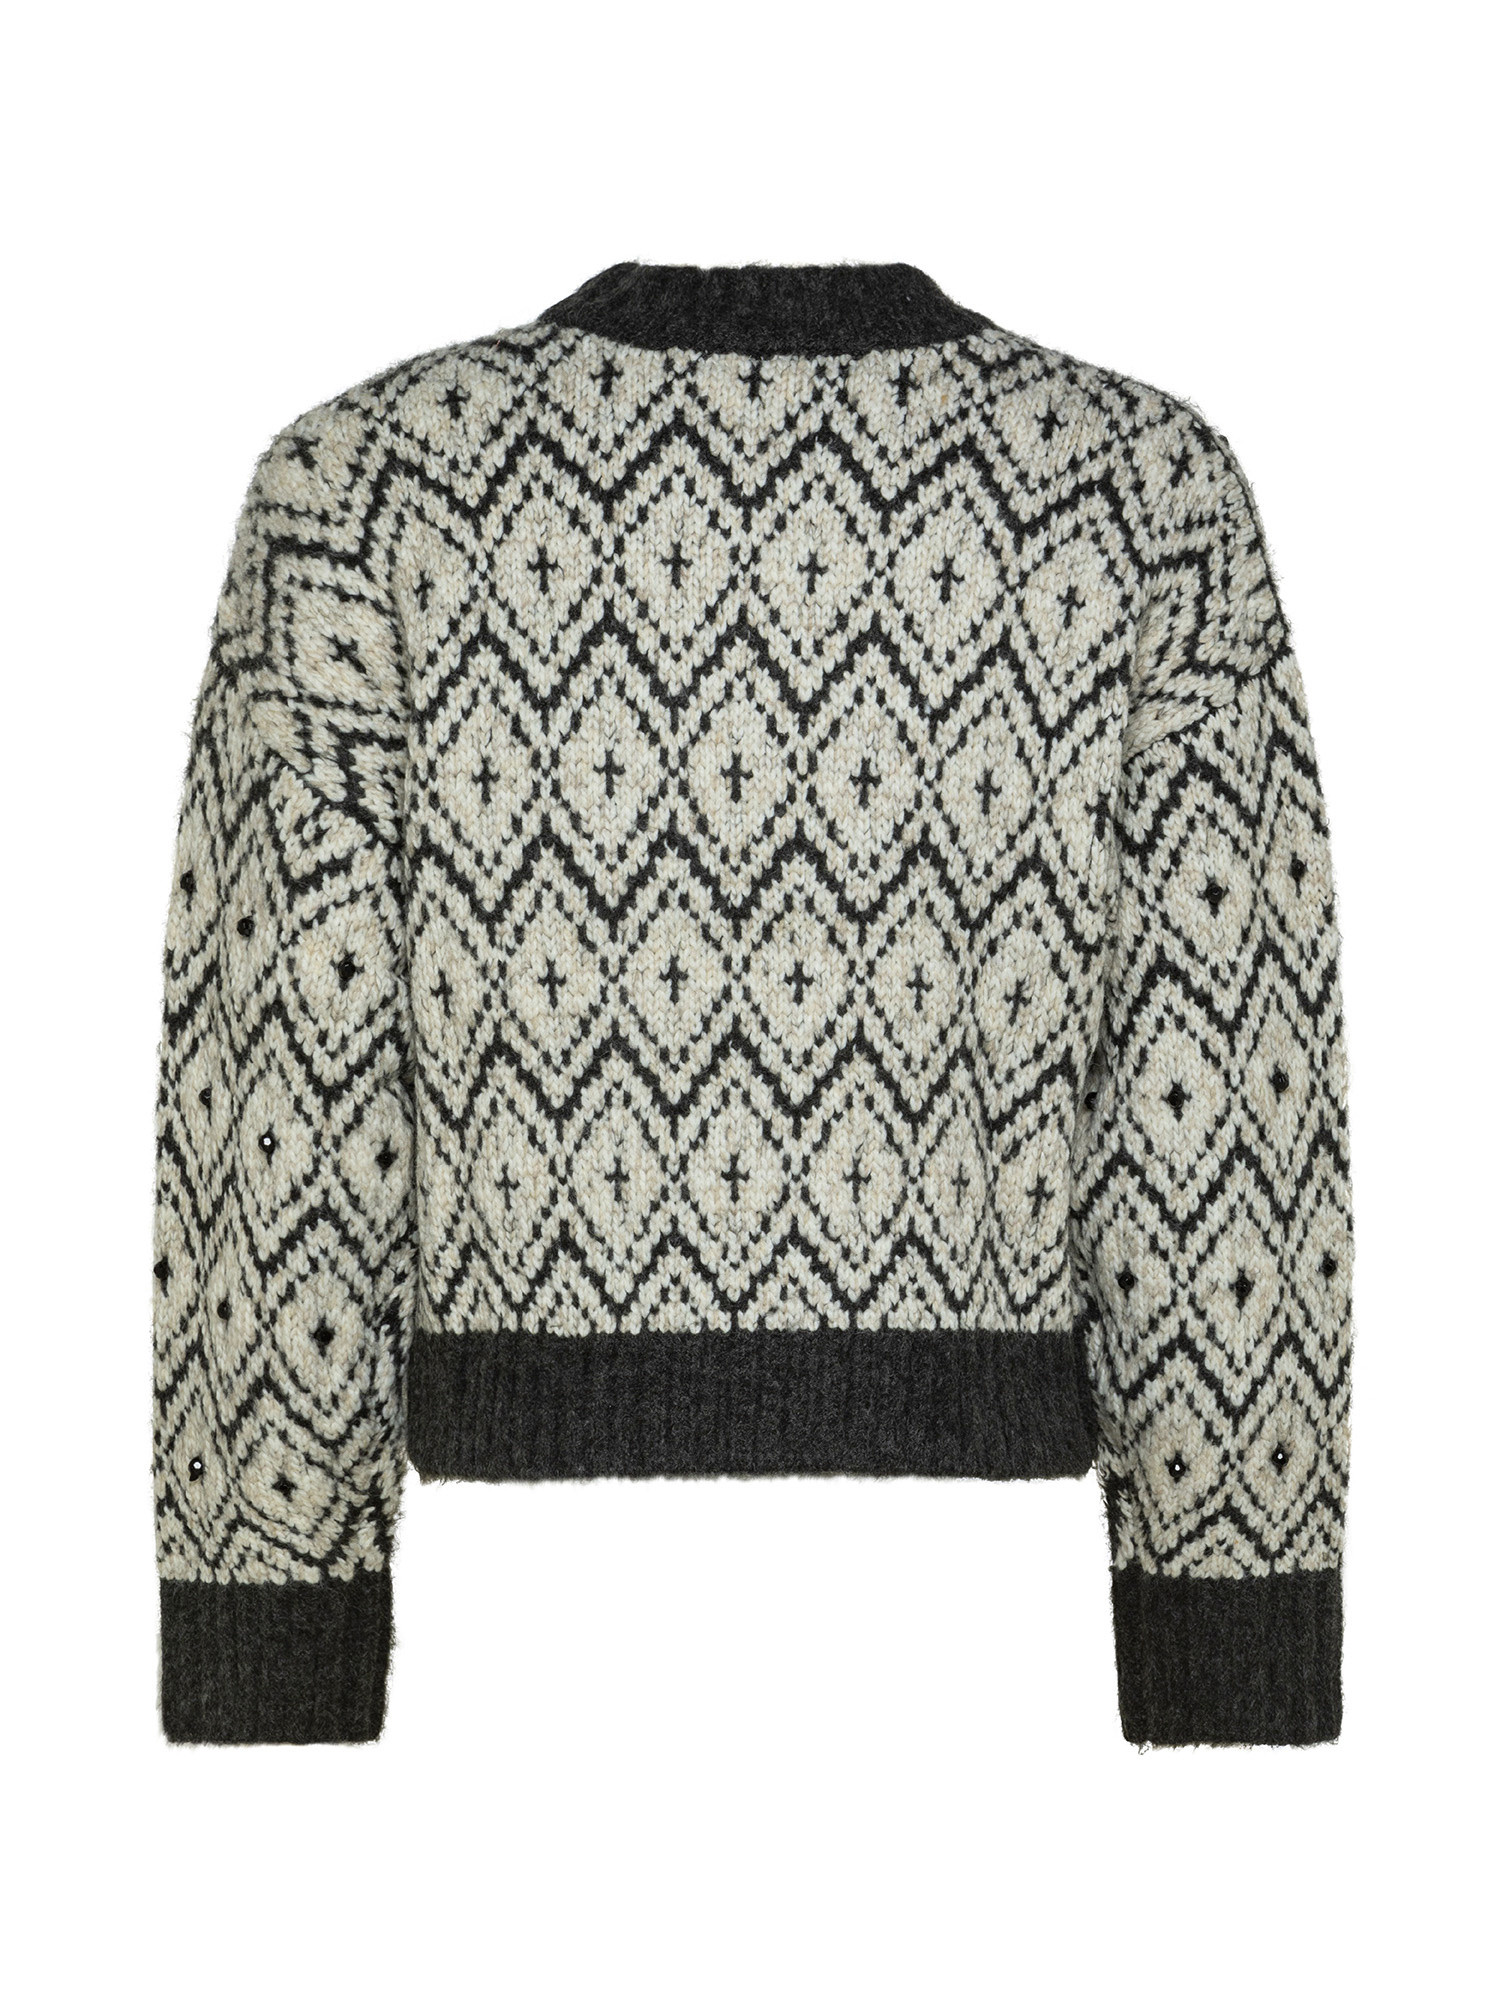 Pullover jacquard Bexa, Multicolor, large image number 1